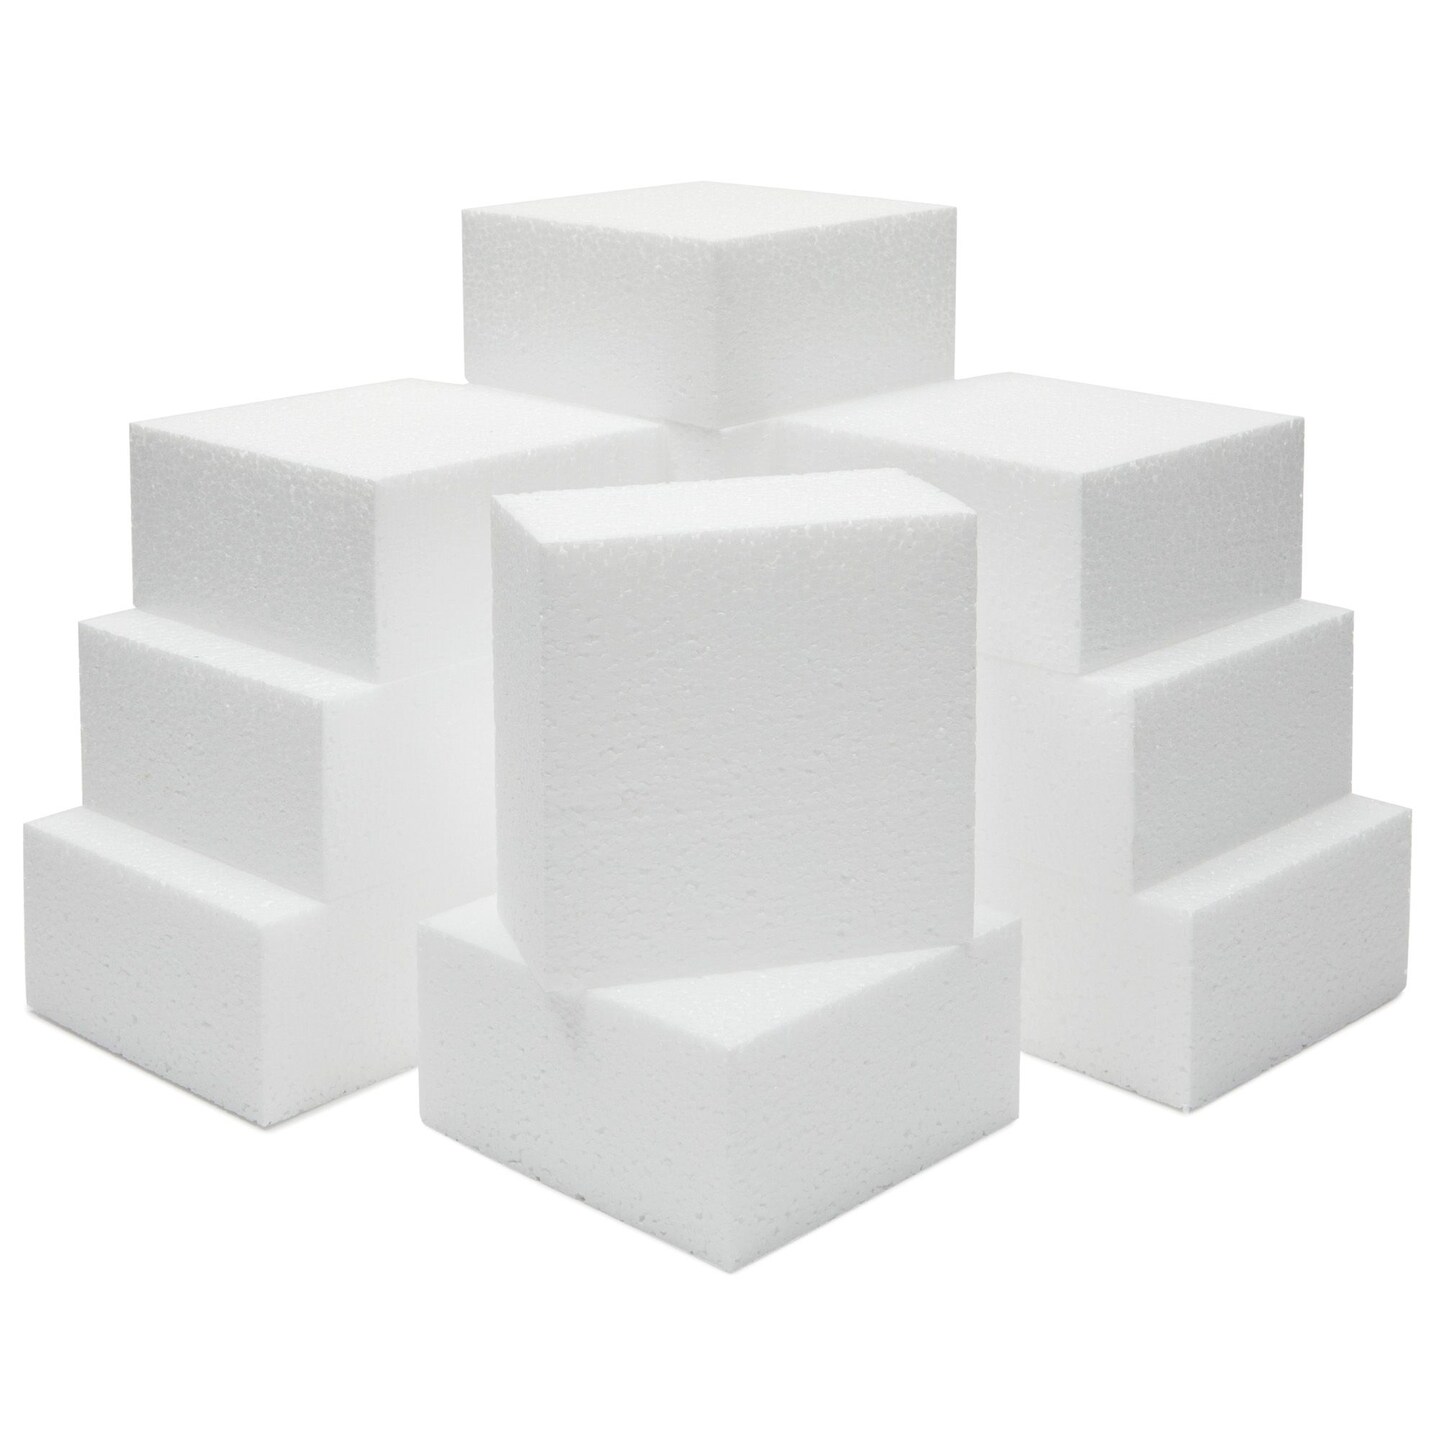 Carving Foam - Big Blocks, For Sale in Commerce